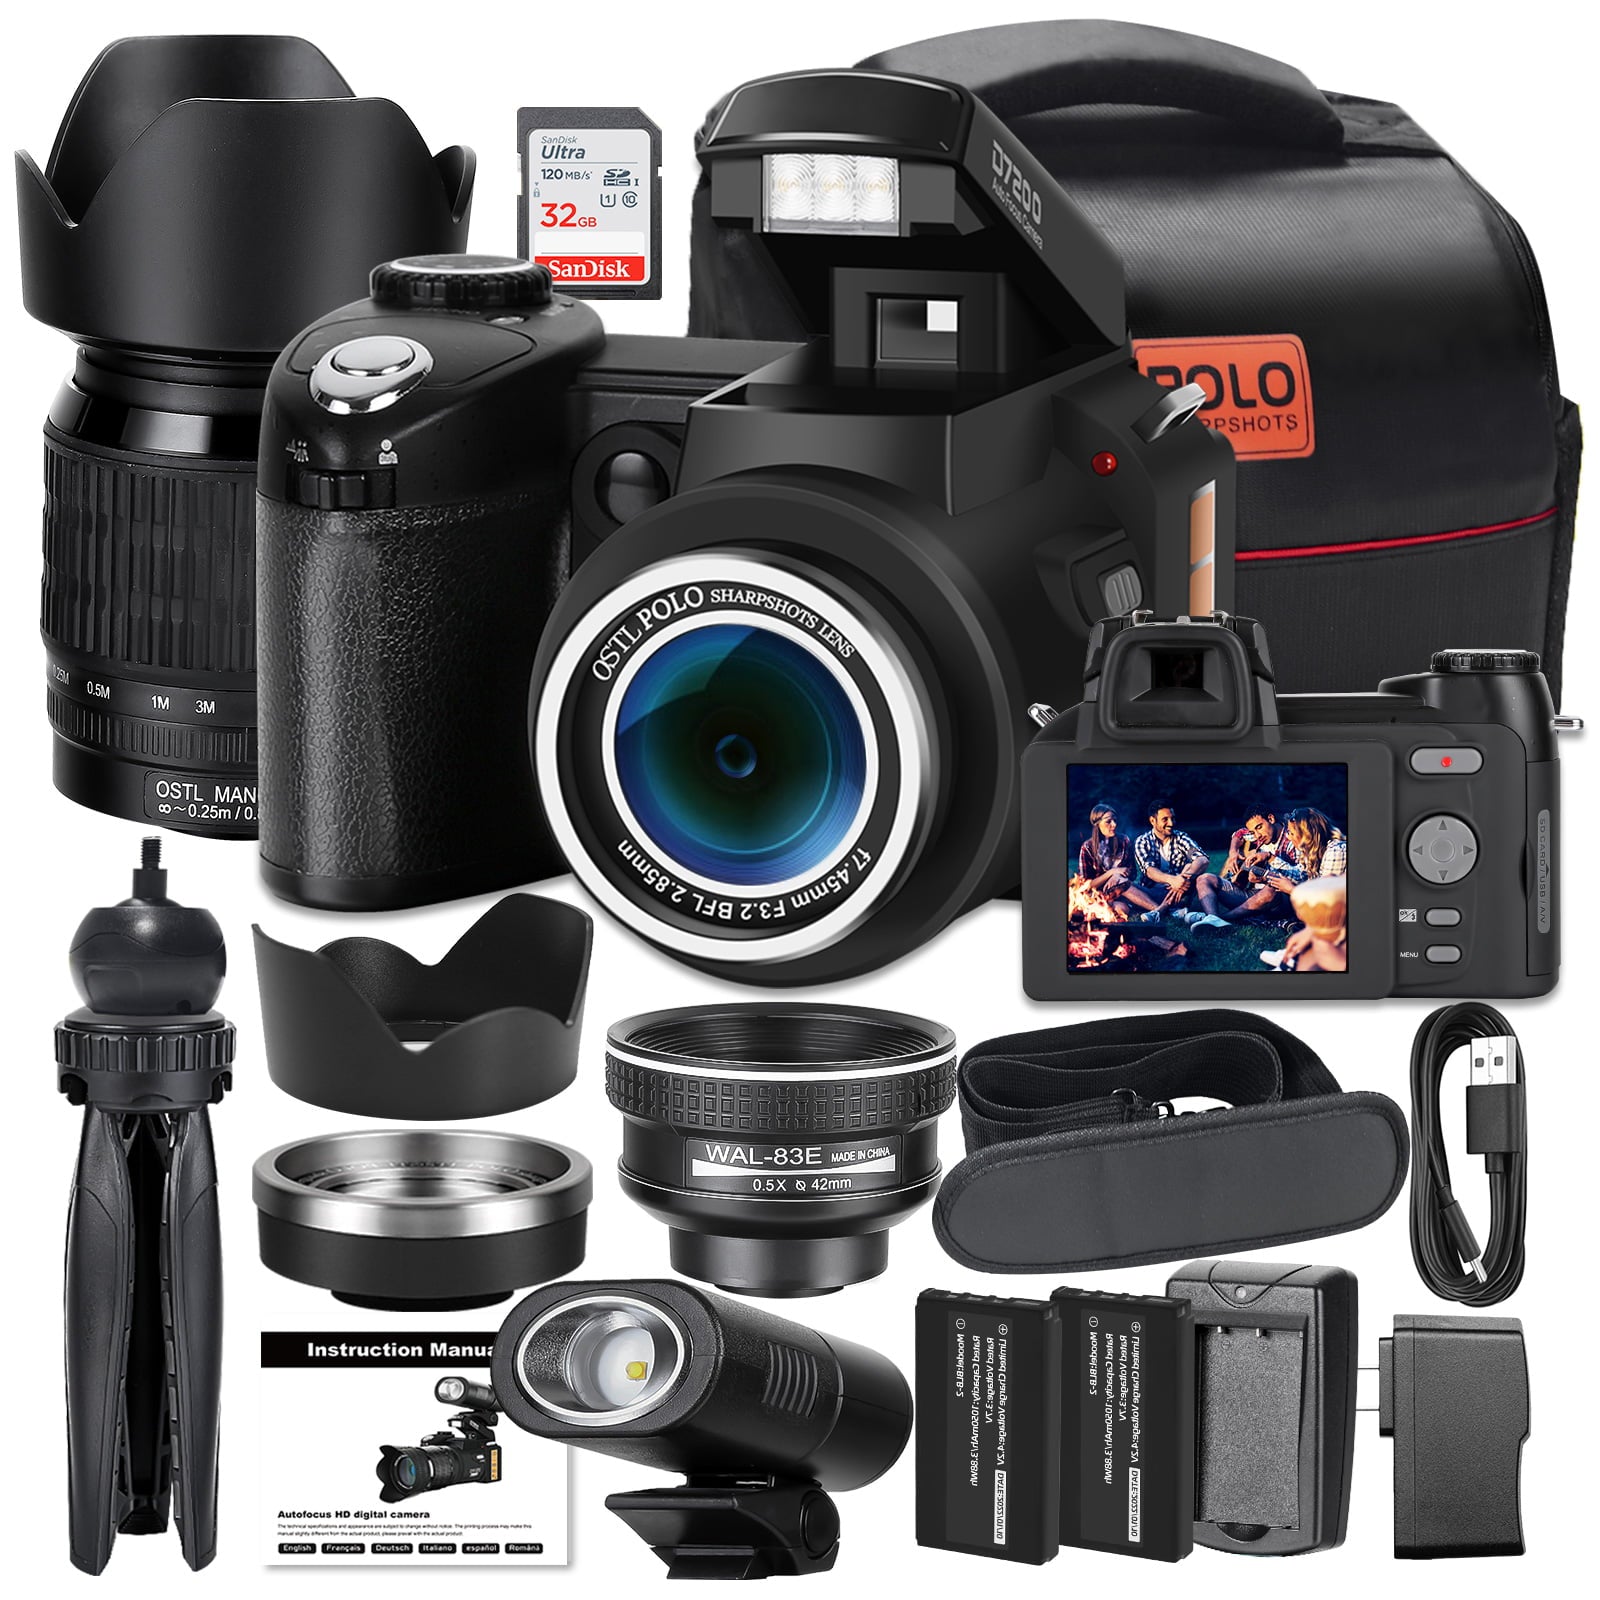 NBD DSLR Camera 33MP 4K Camcorder with Telephoto Lens, Wide Angle Lens, and IPS Screen